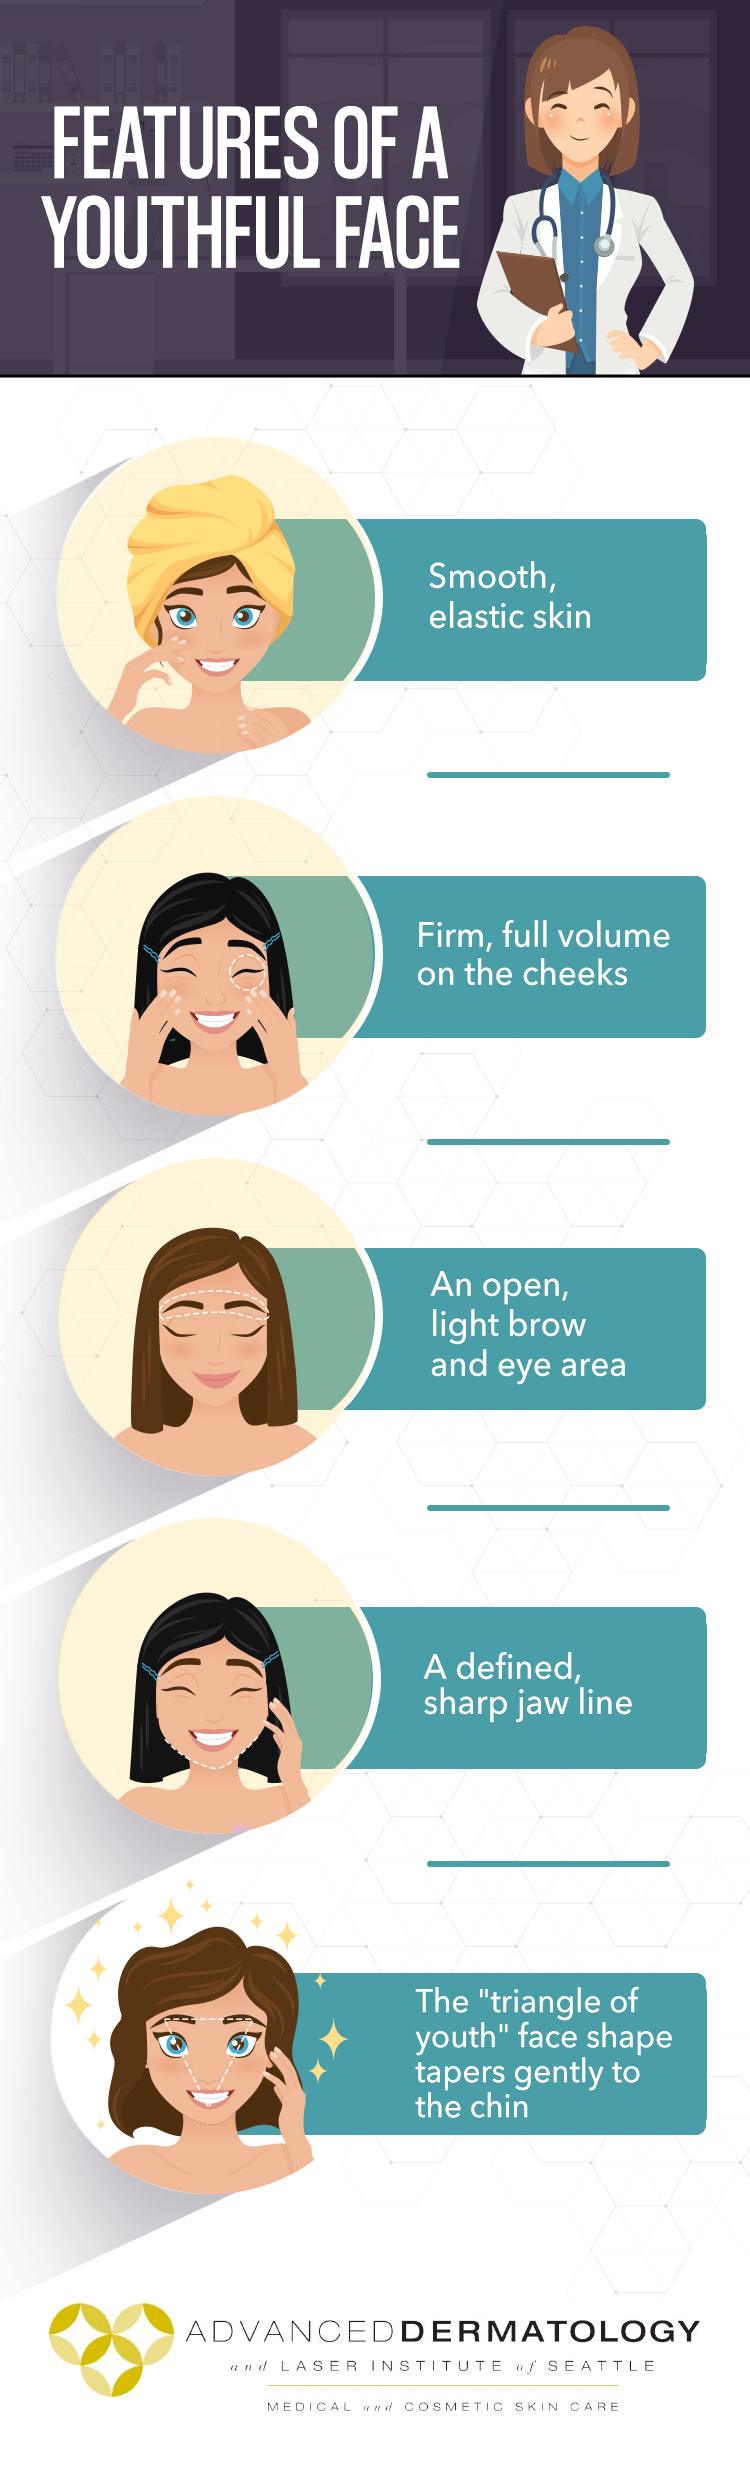 An infographic describing the features of a youthful face